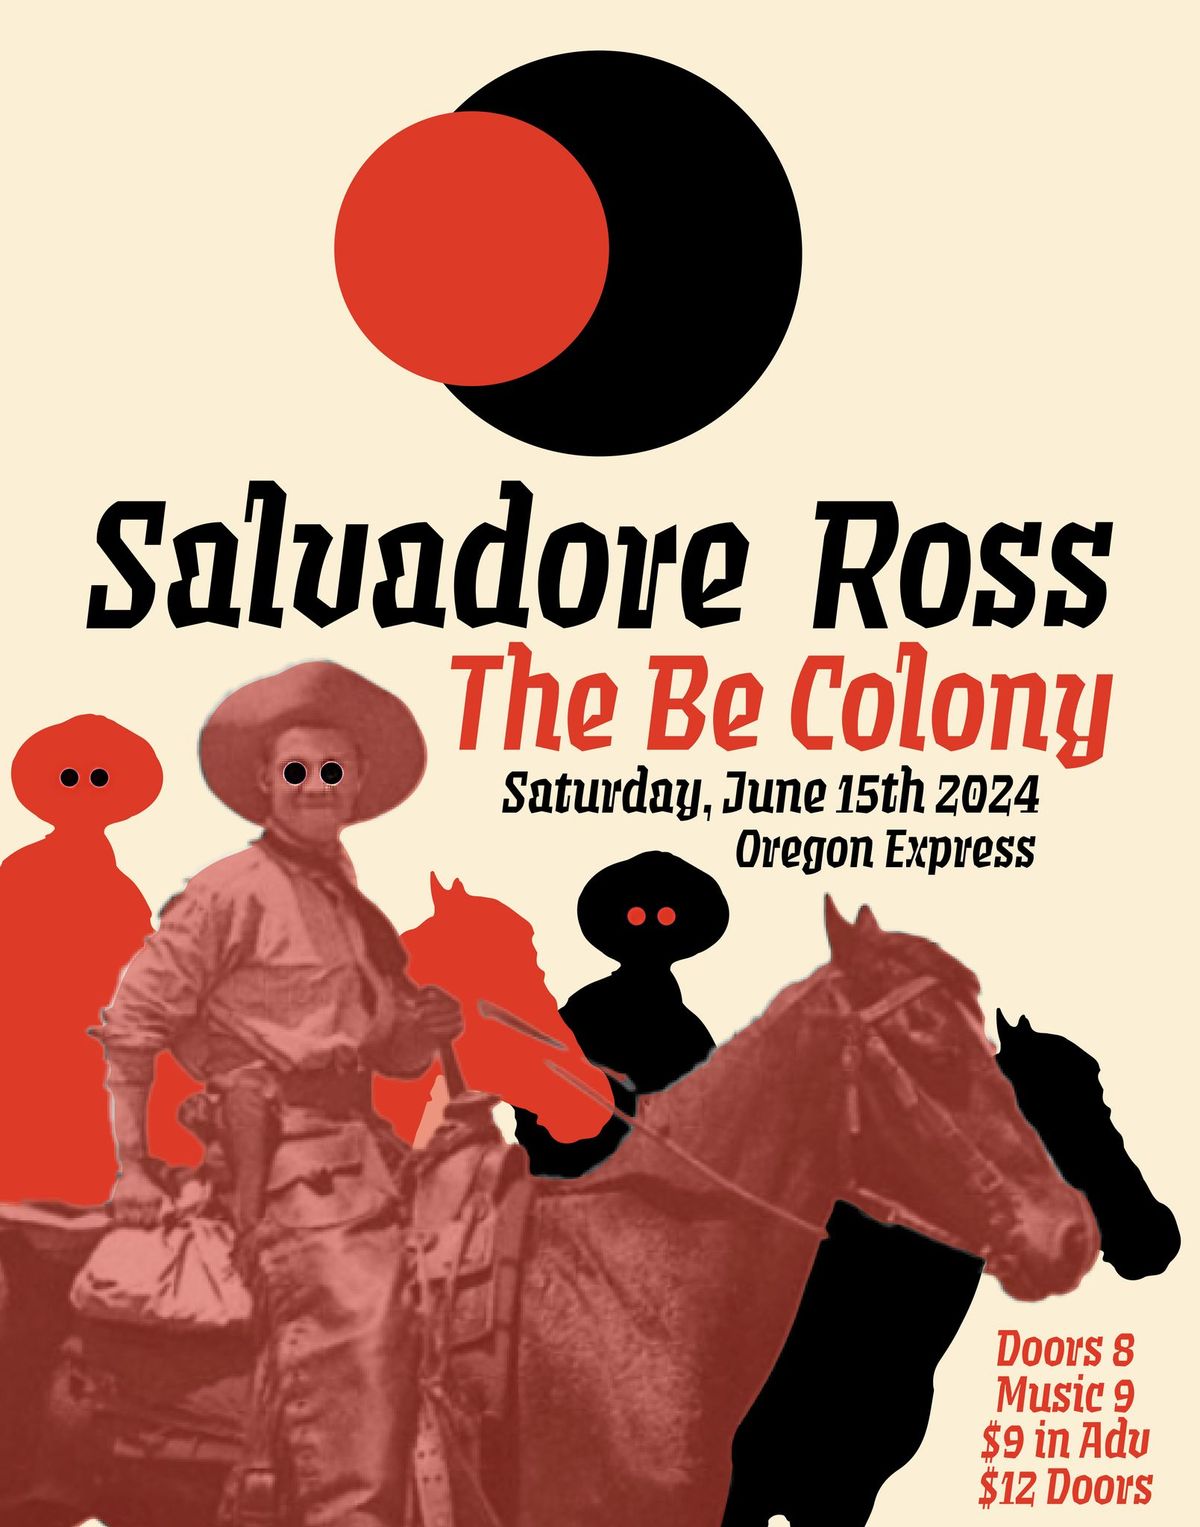 Salvadore Ross and The Be Colony - June 15th